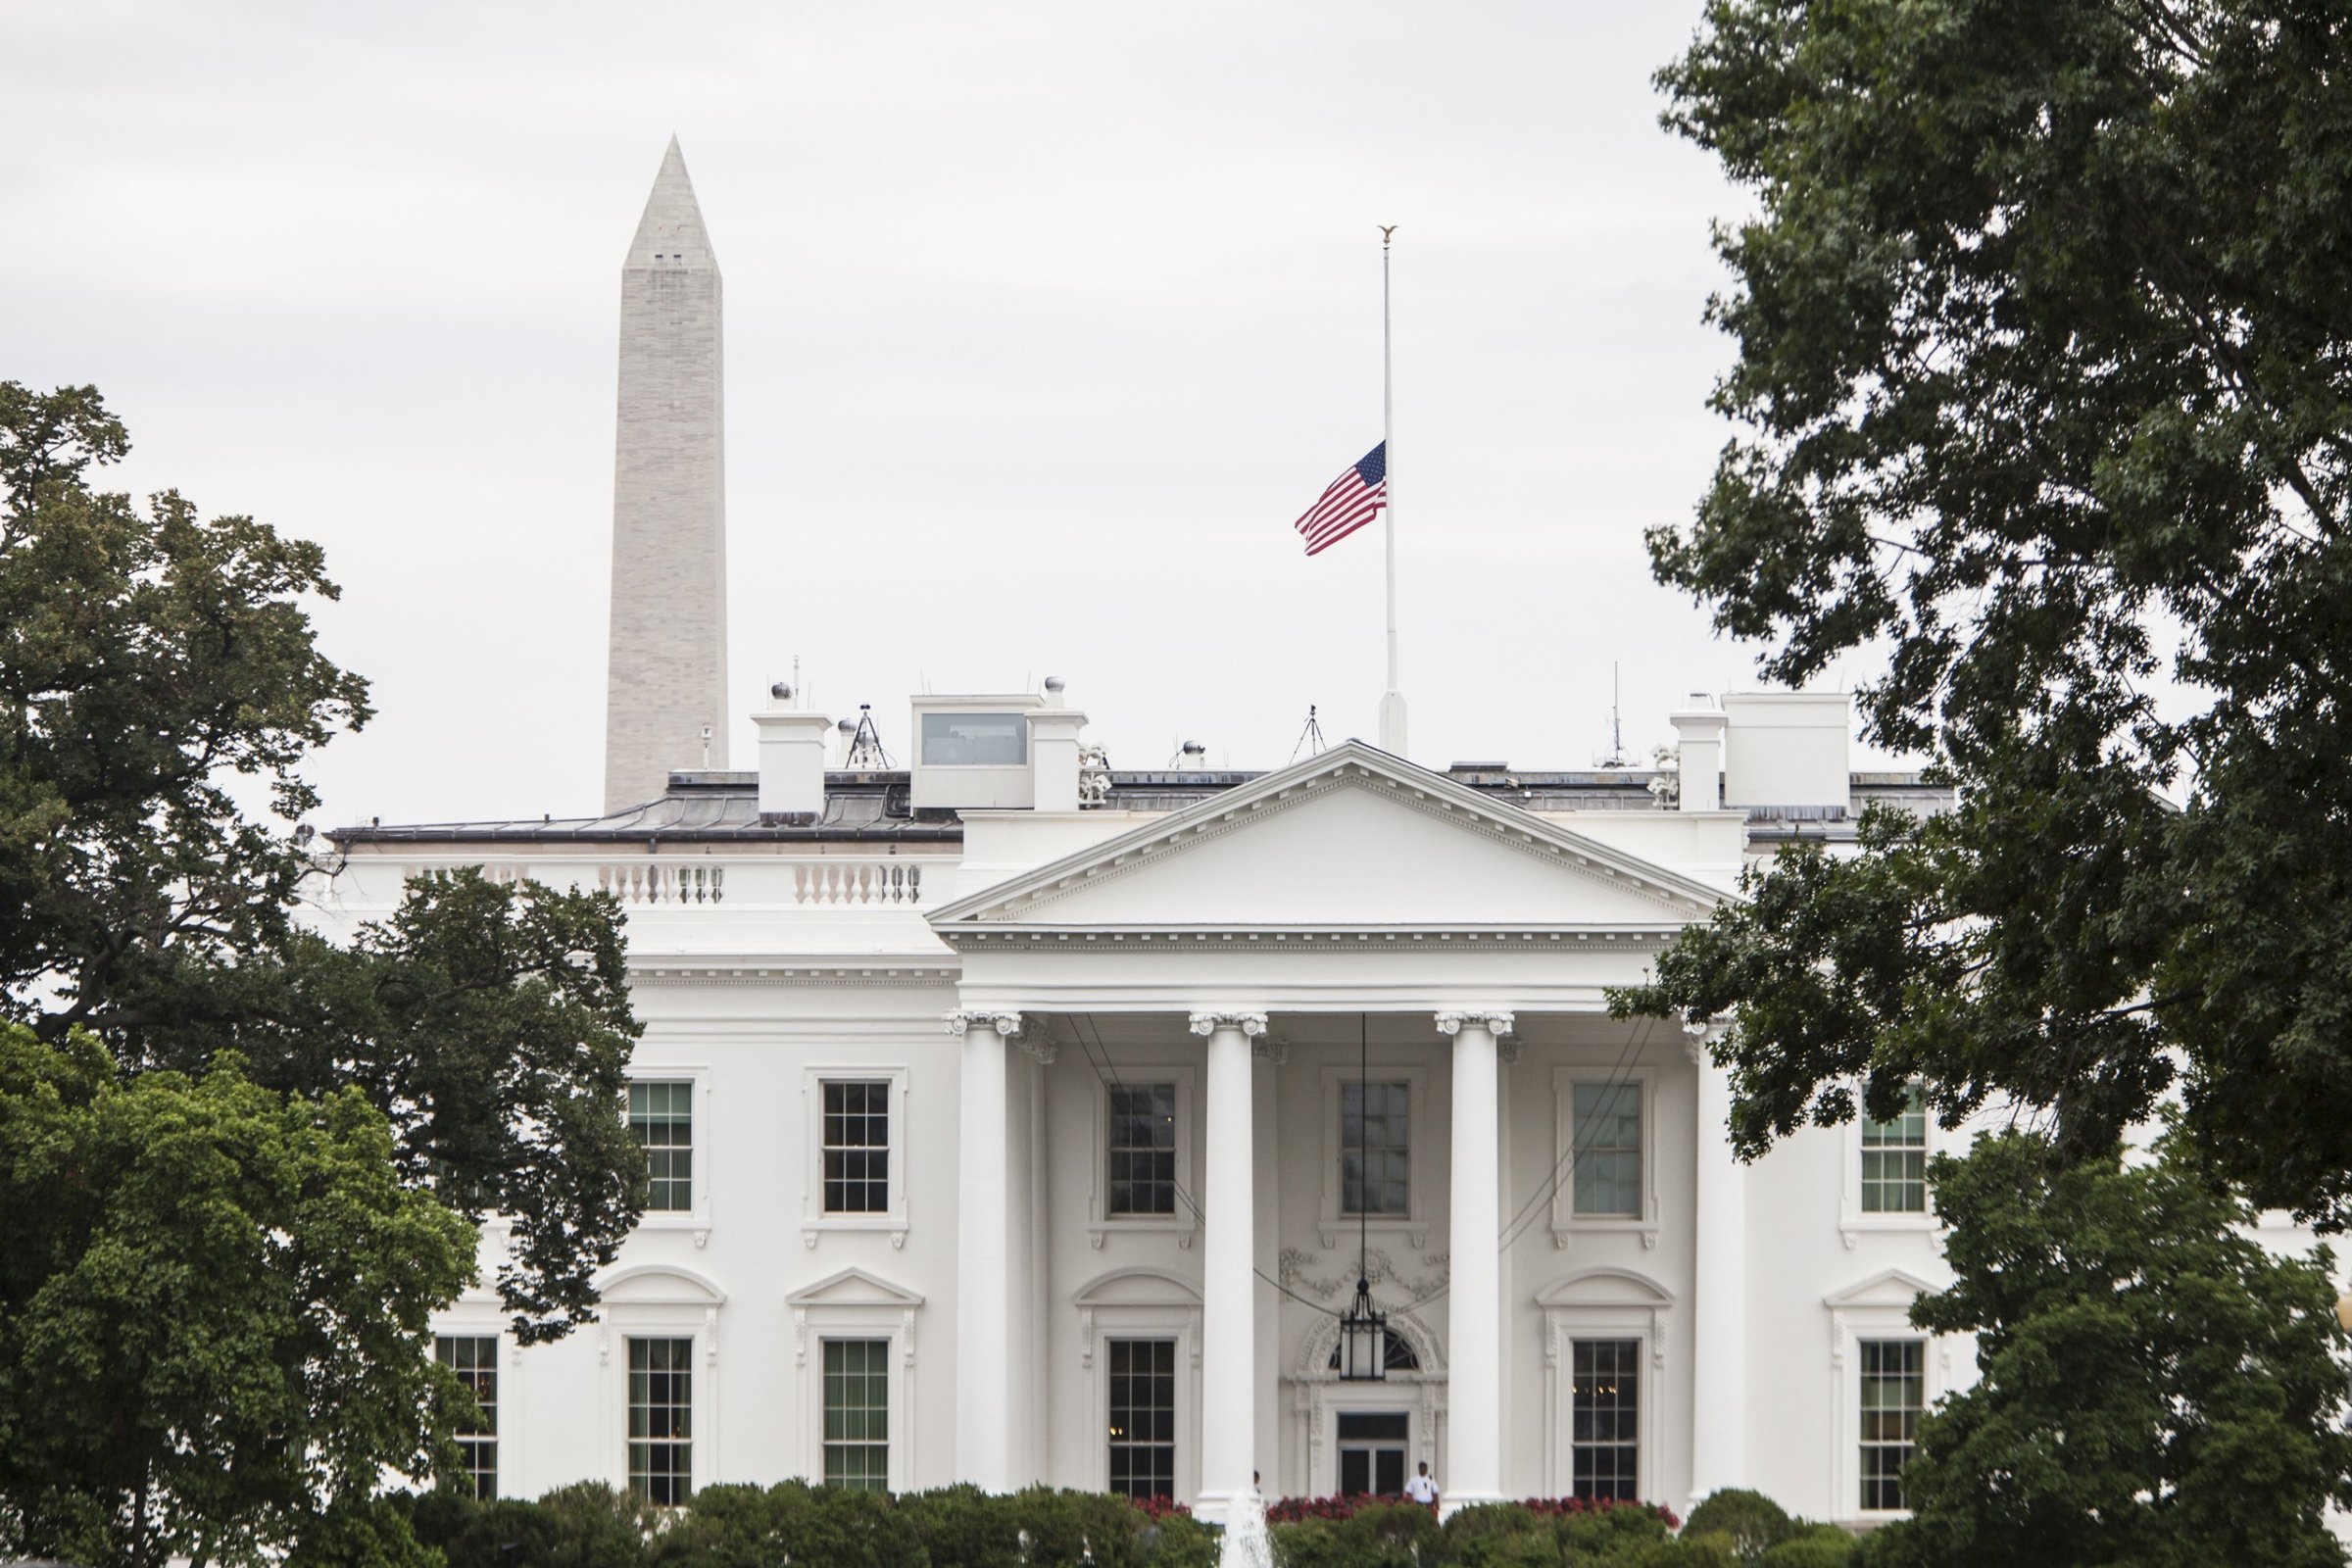 WASHINGTON, USA - JULY 21: The American Flag flies above the White House after President Barack Obama ordered it lowered to half staff in honor of the four Marines and one Sailor killed in Chattanooga, TN in Washington, USA on JULY 21, 2015. (Photo by Samuel Corum/Anadolu Agency/Getty Images)